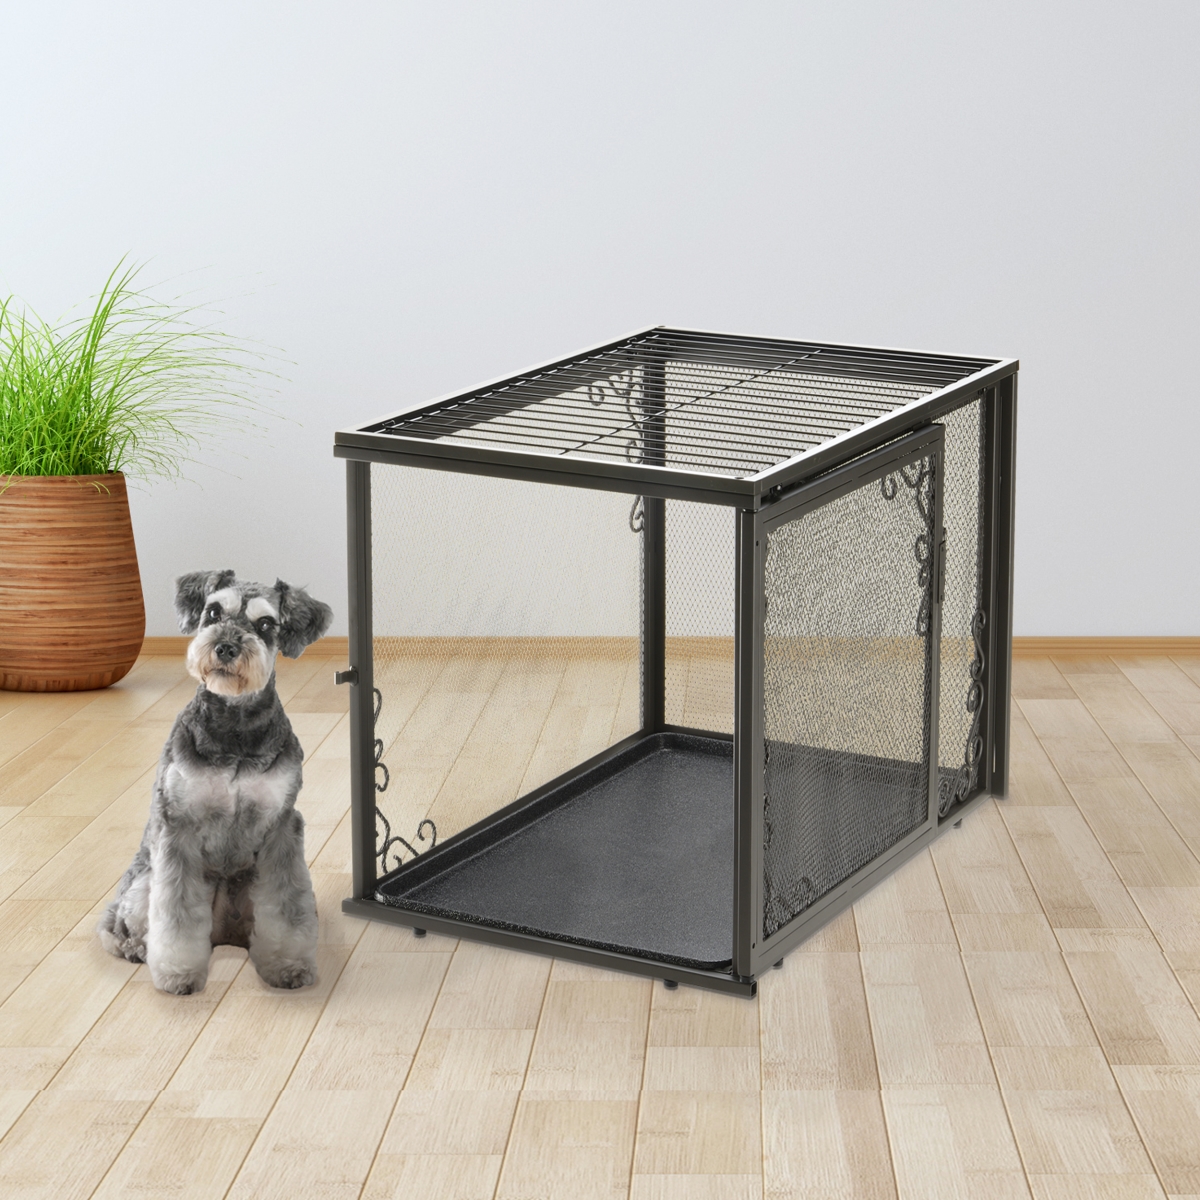 Picture of Richell 80018 Richell Metal Mesh Pet Crate Medium in Antique Bronze